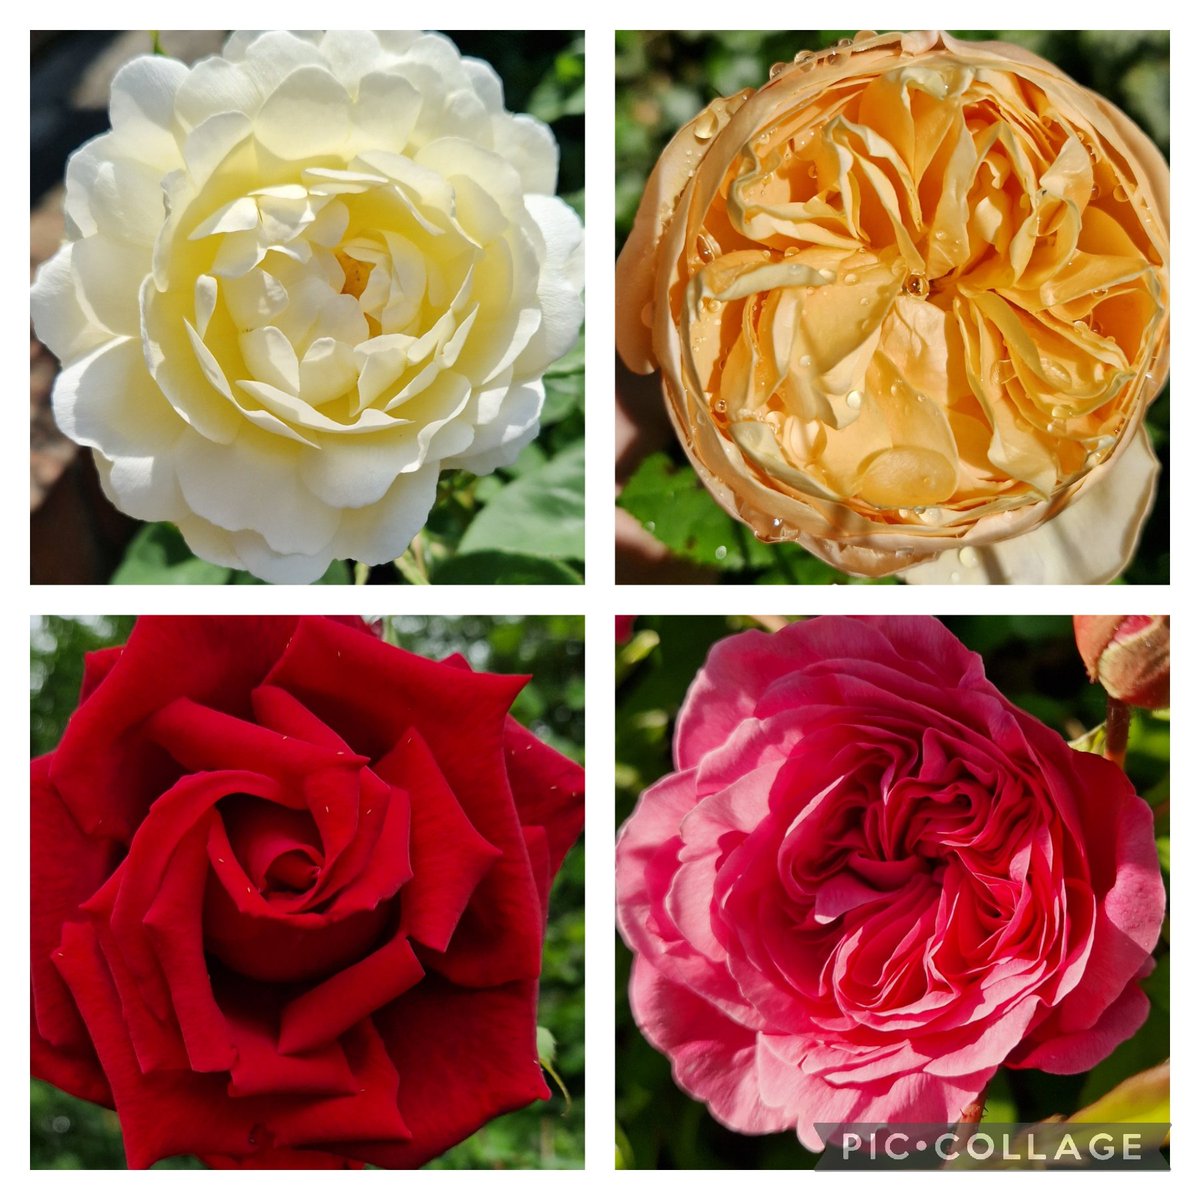 Beauty, colour and fragrance. What more could you ask for? #RoseWednesday #Gardening #GardeningTwitter #GardenersWorld #Roses